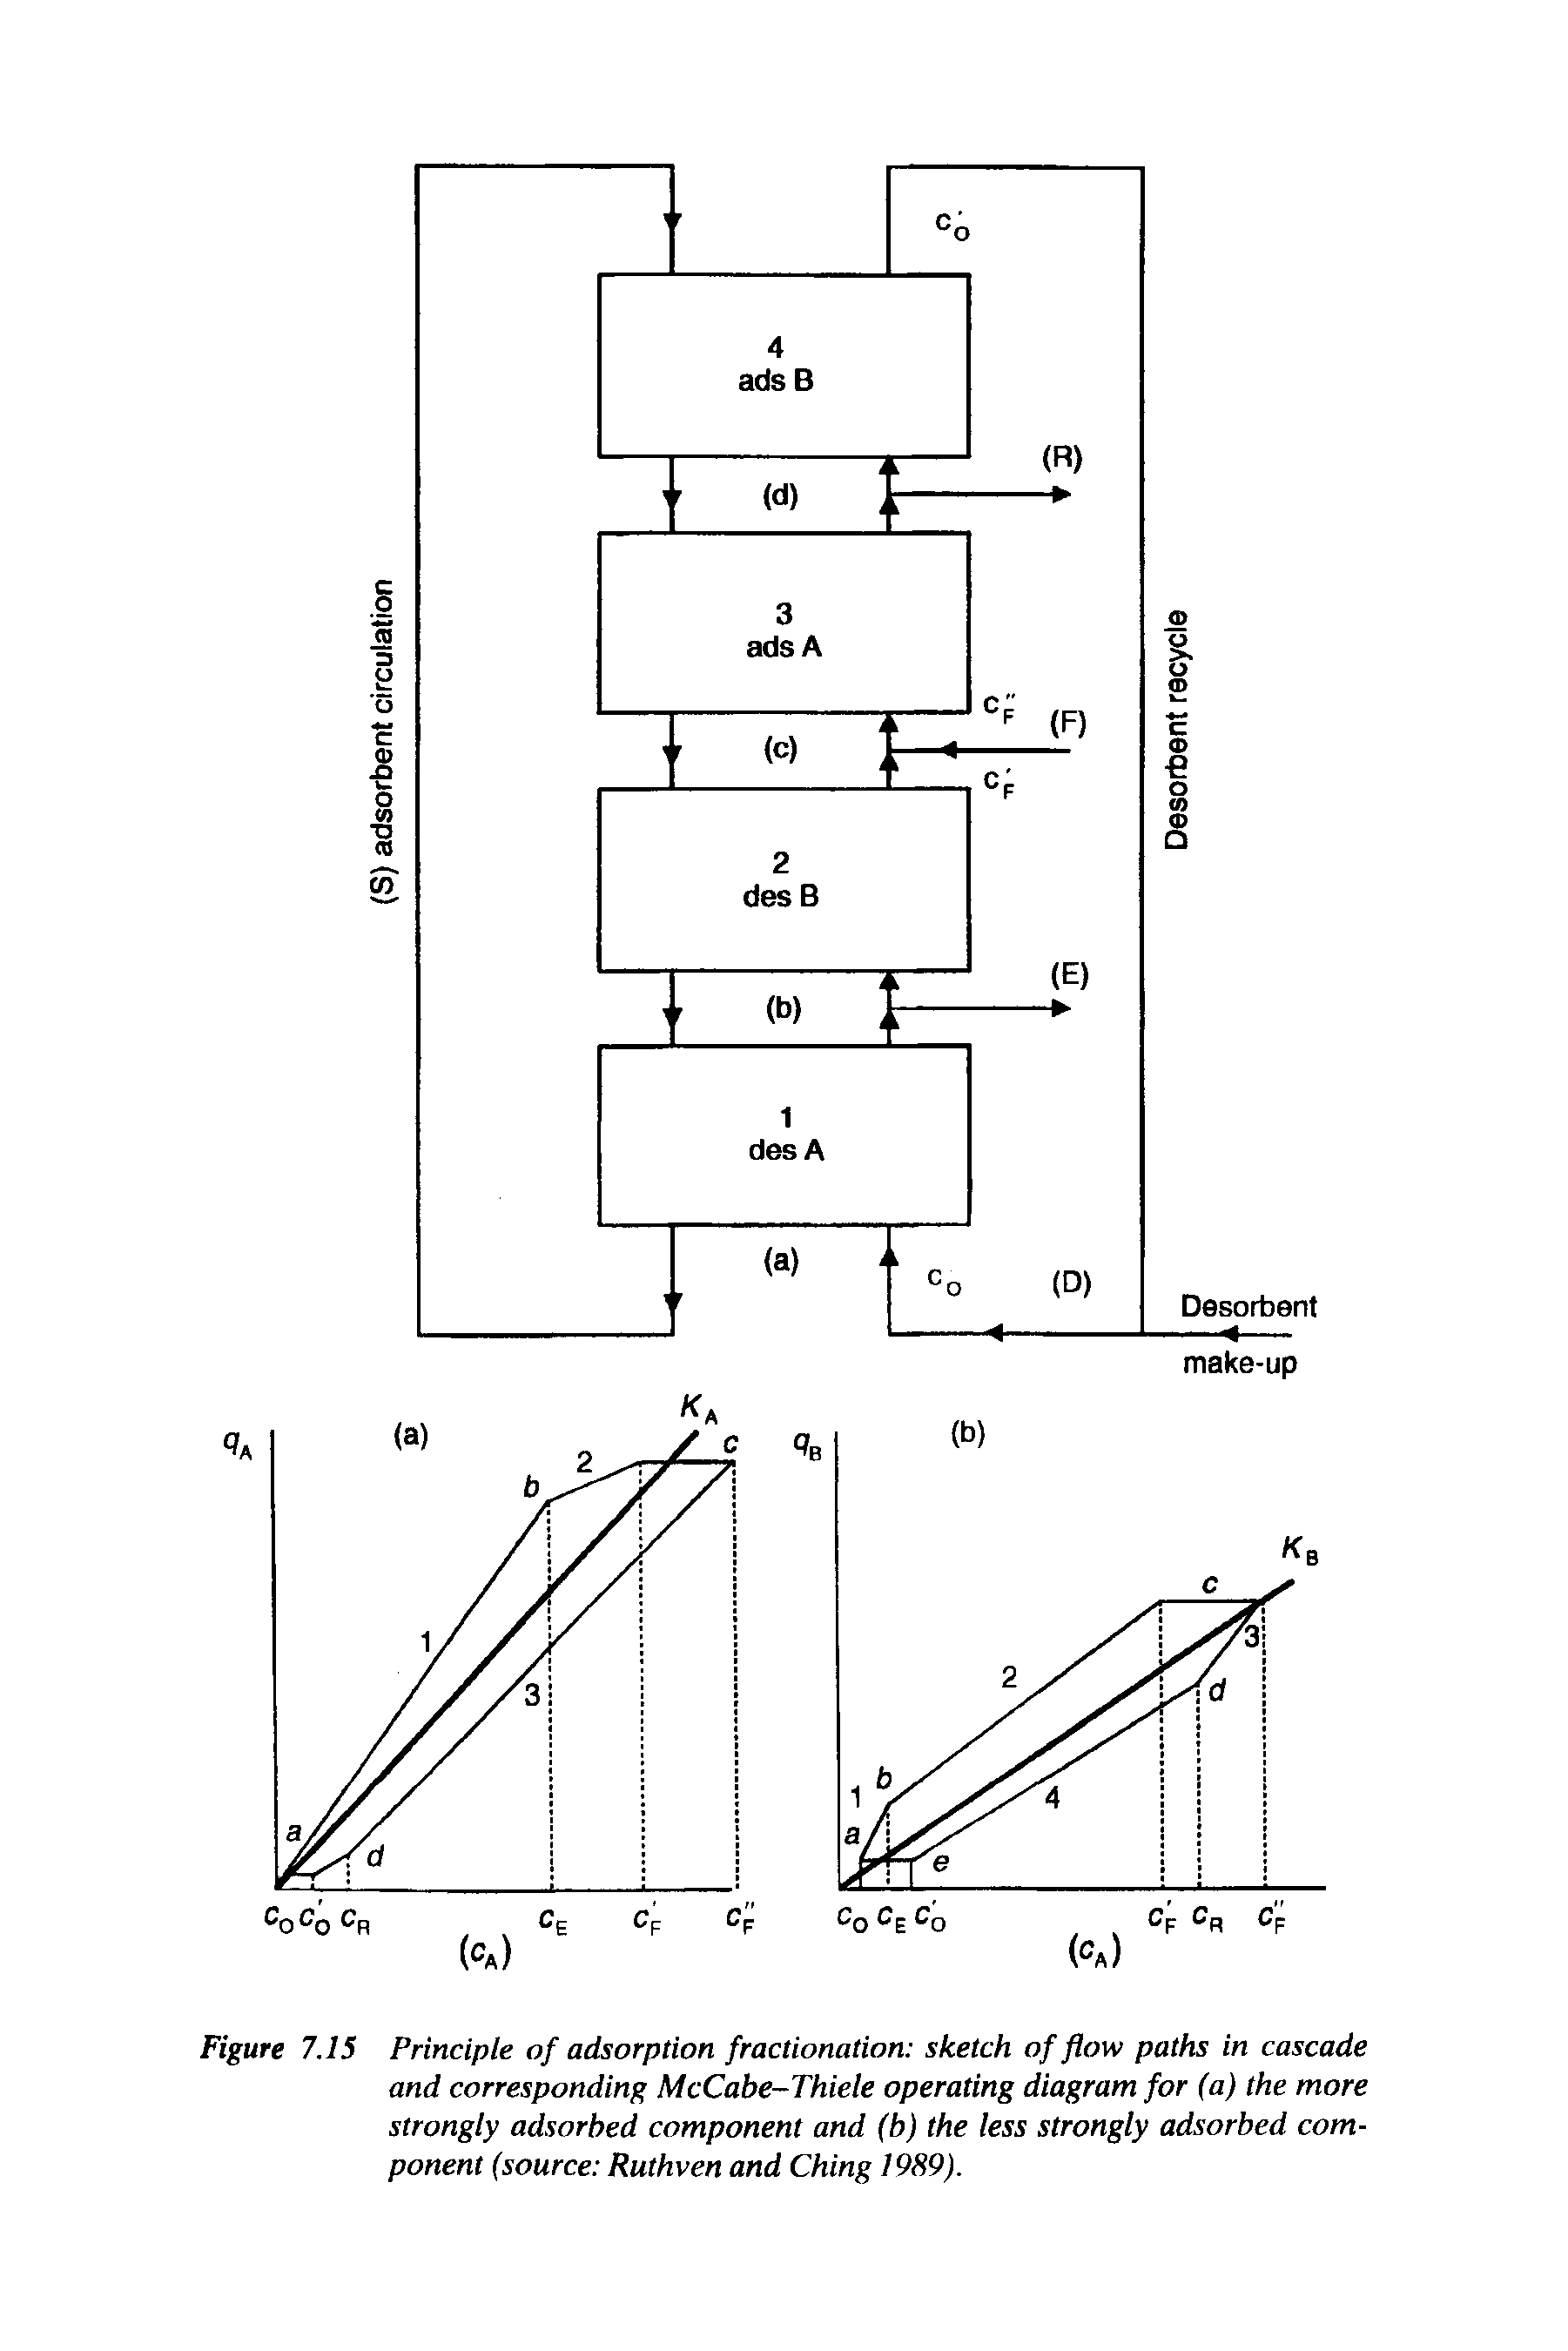 Figure 7.15 Principle of adsorption fractionation sketch of flow paths in cascade and corresponding McCabe-Thiele operating diagram for (a) the more strongly adsorbed component and (b) the less strongly adsorbed component (source Ruthven and Ching 1989).